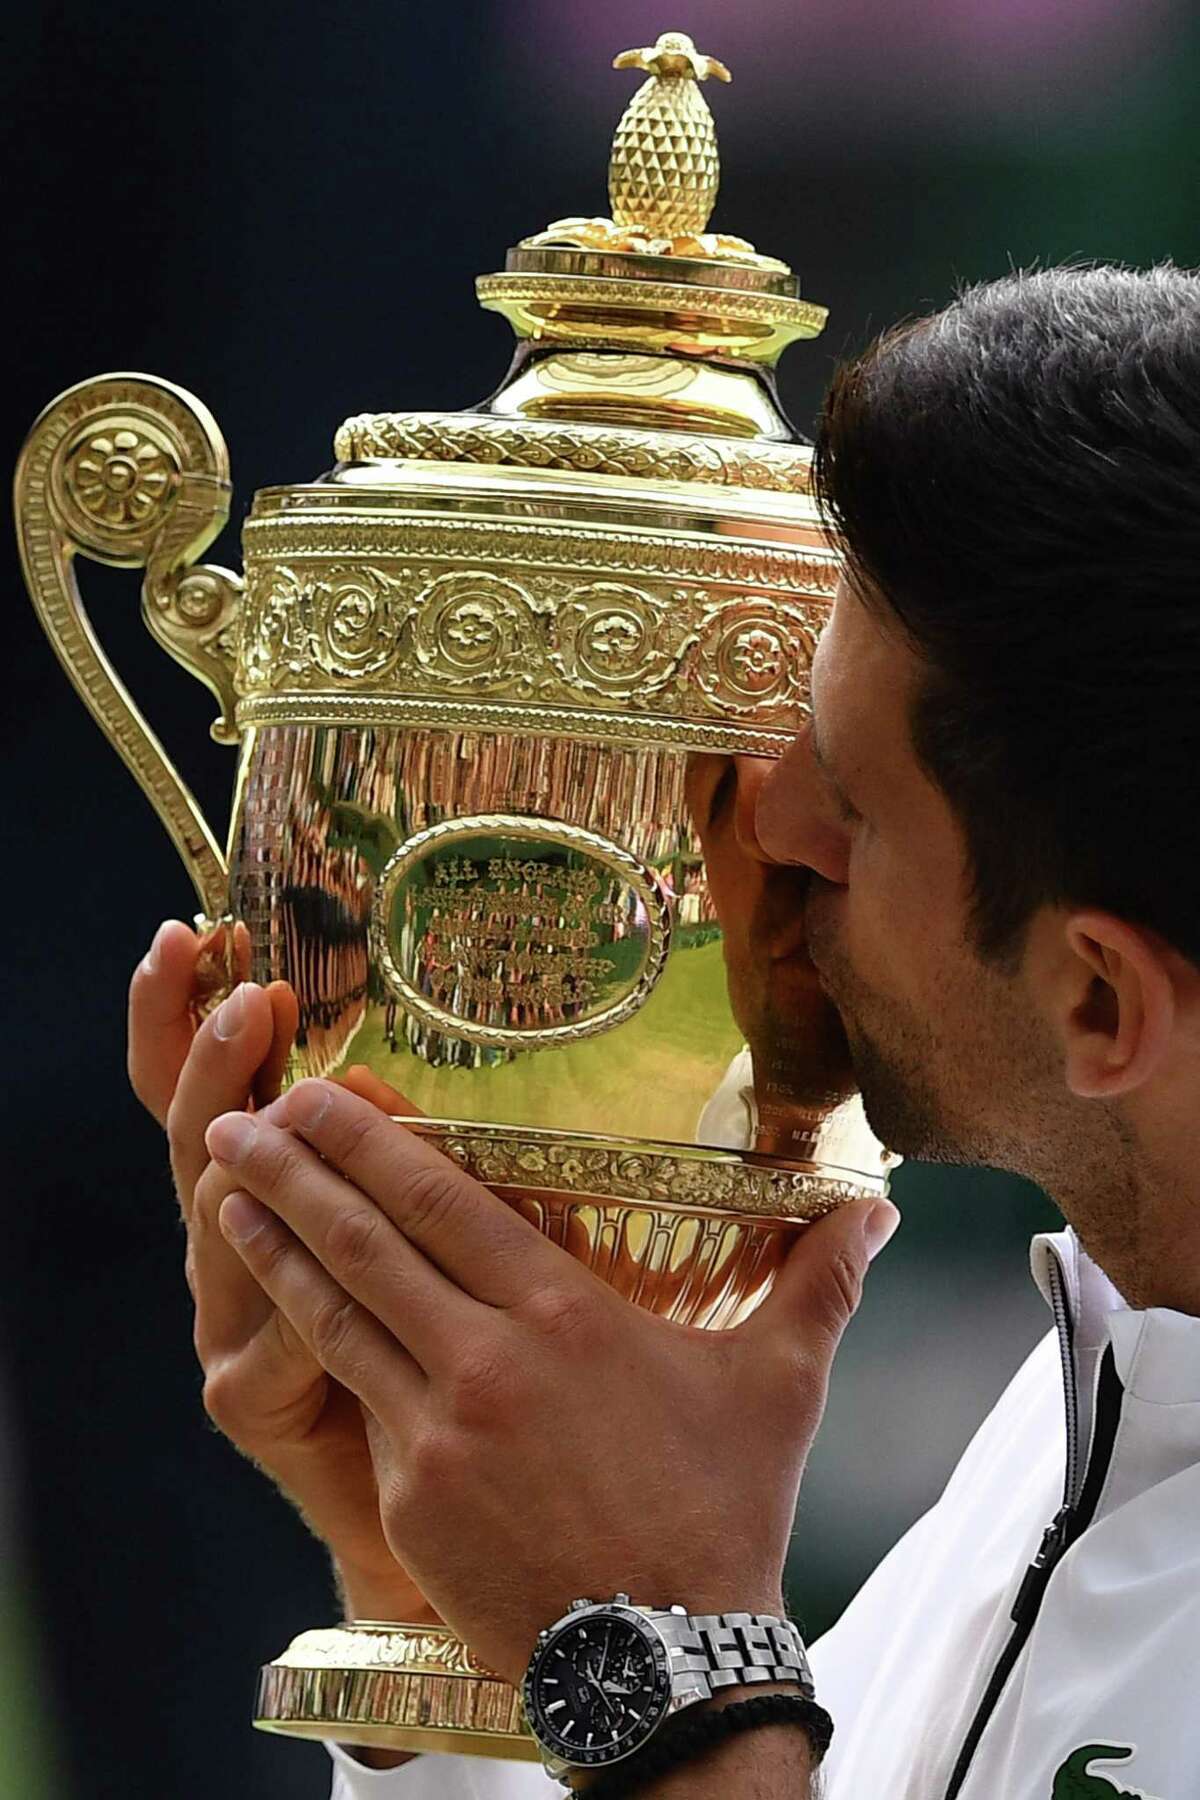 Serbia's Novak Djokovic kisses the winner's trophy after beating Switzerland's Roger Federer during their men's singles final on day thirteen of the 2019 Wimbledon Championships at The All England Lawn Tennis Club in Wimbledon, southwest London, on July 14, 2019. (Photo by Daniel LEAL-OLIVAS / AFP) / RESTRICTED TO EDITORIAL USEDANIEL LEAL-OLIVAS/AFP/Getty Images